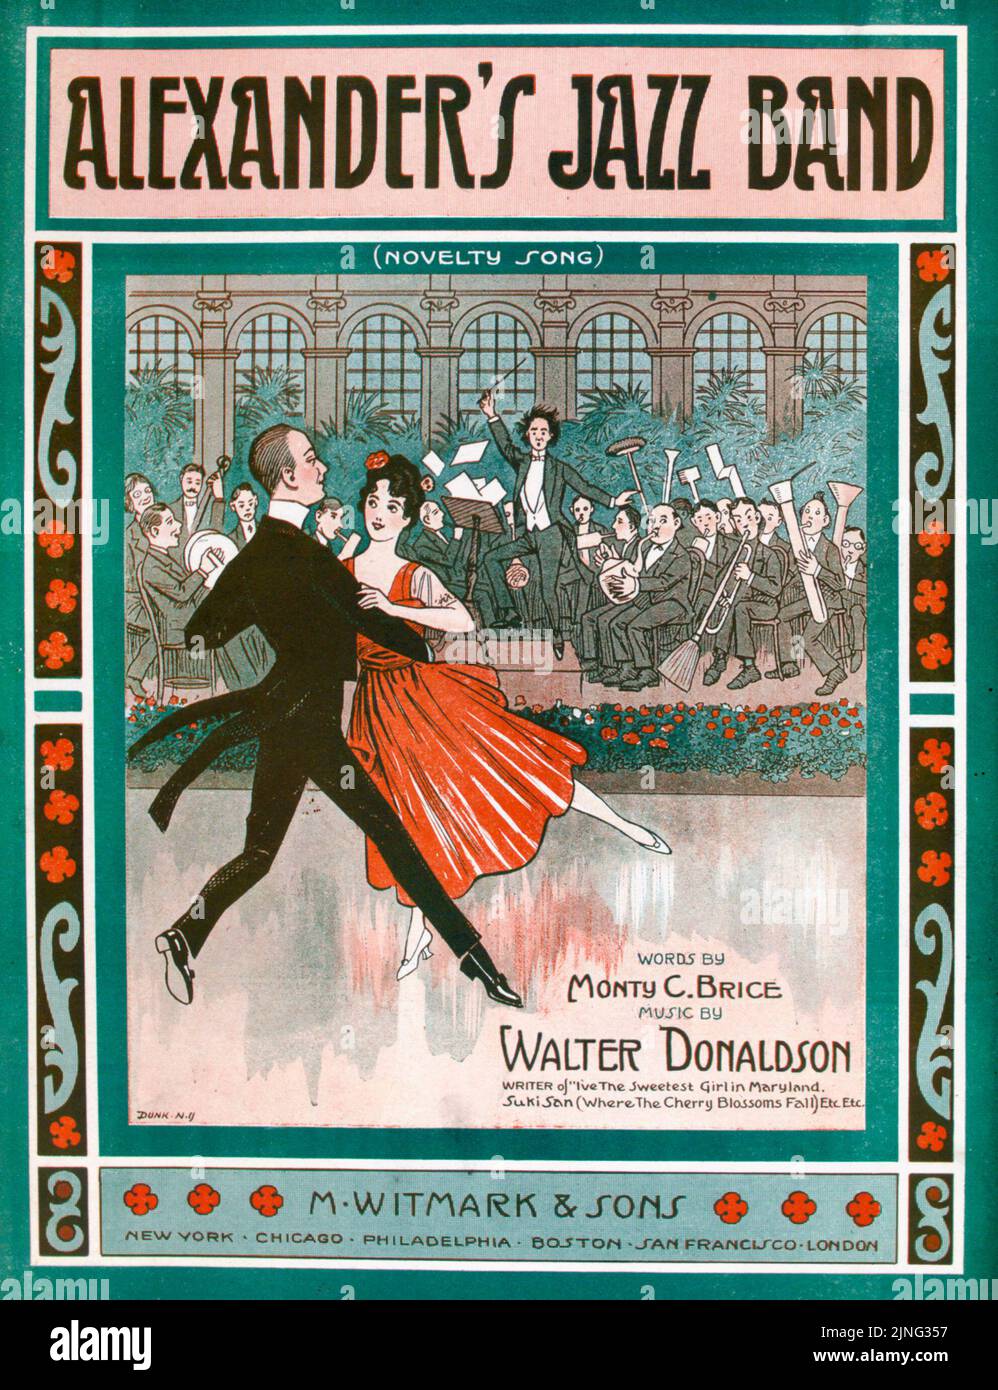 Alexander’s jazz band (1920) Novelty song, Words by Monty C. Brice, Music by Walter Donaldson, Published by M. Witmark and Sons. Sheet music cover. Illustration by Dunk Stock Photo